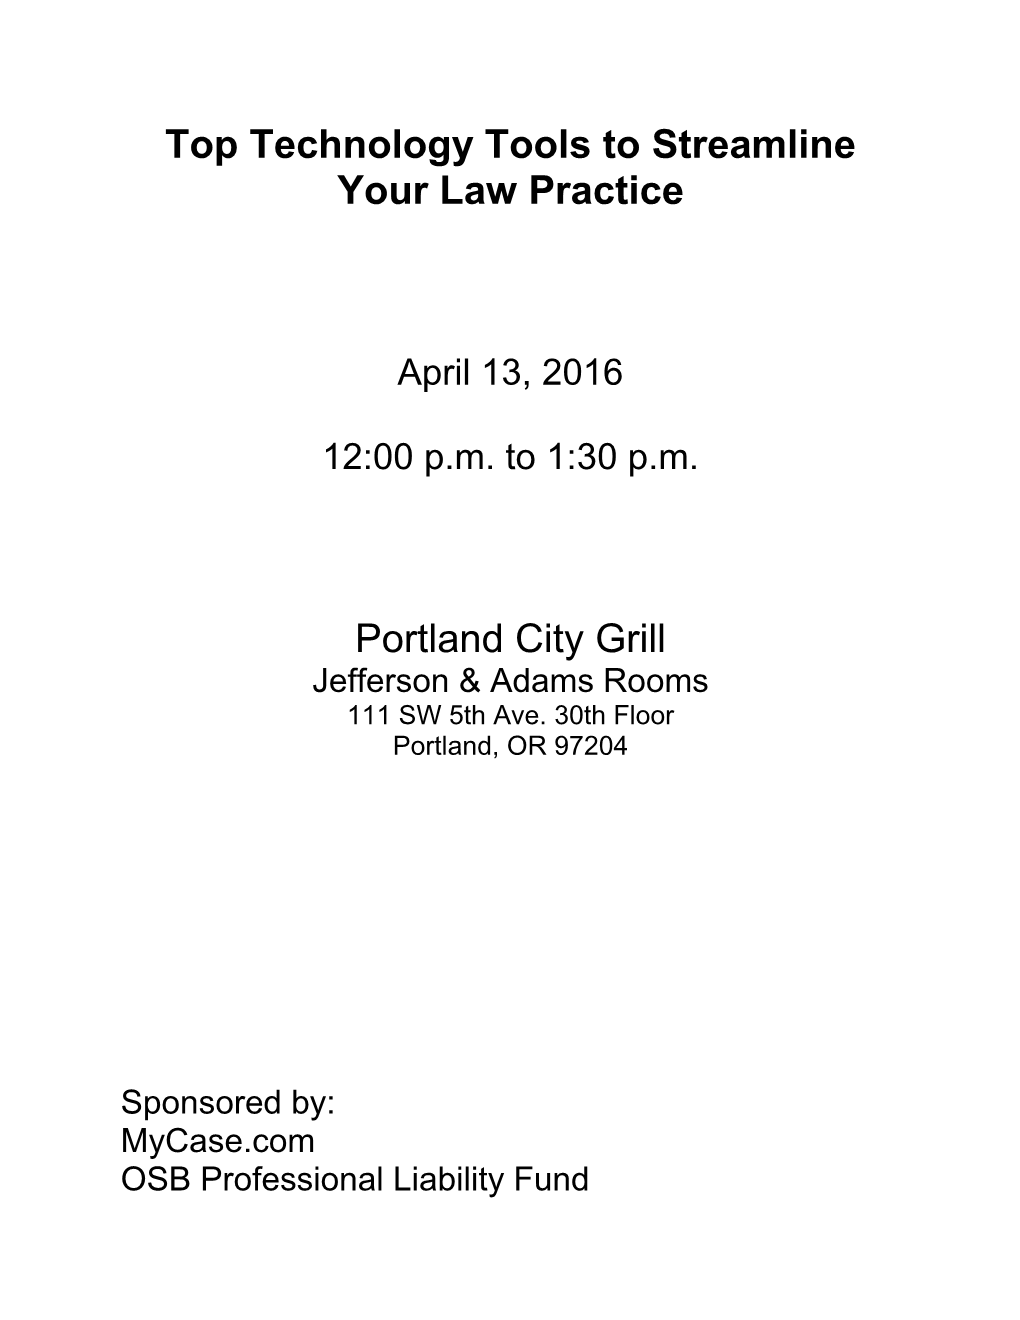 Top Technology Tools to Streamline Your Law Practice Portland City Grill